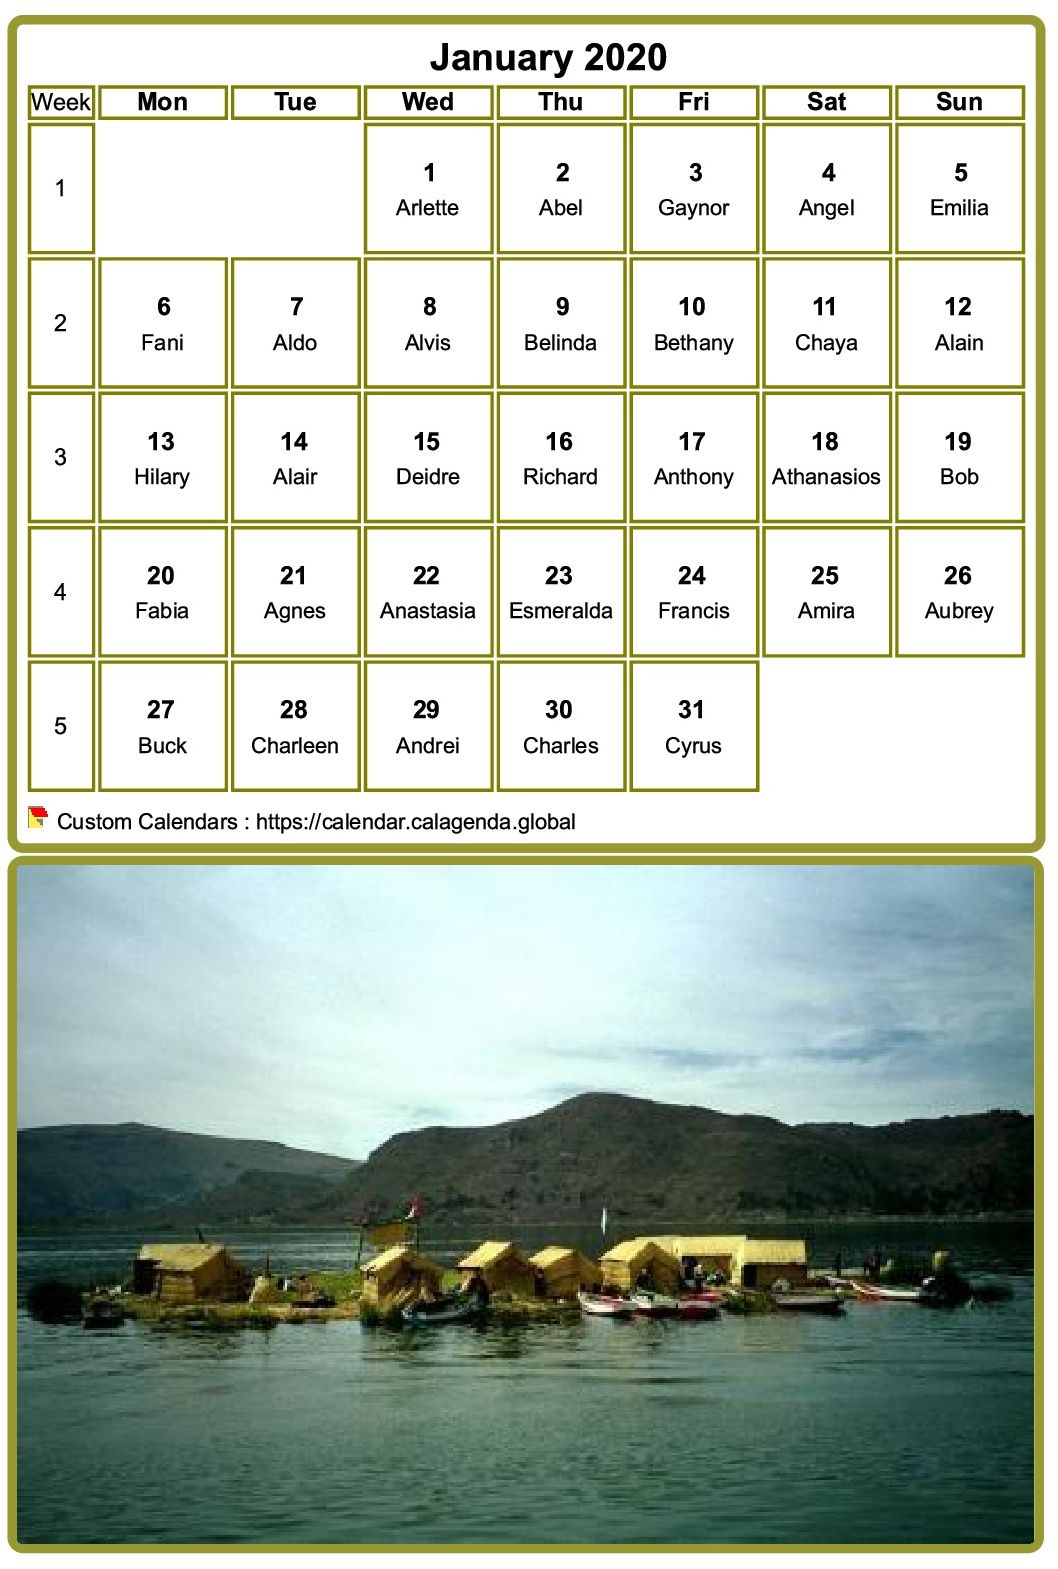 Calendar monthly 2020, table with photo